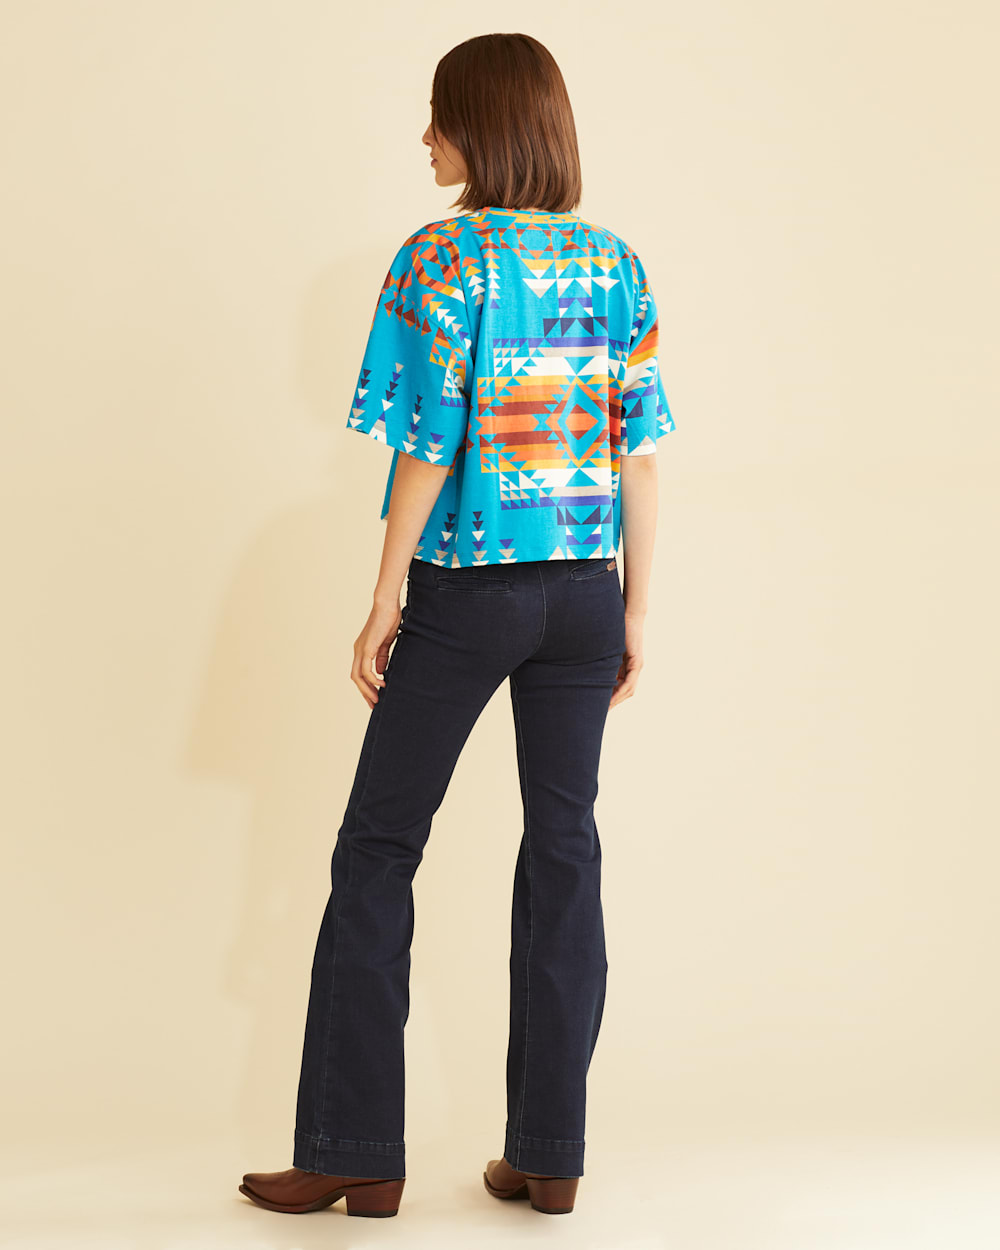 ALTERNATE VIEW OF WRANGLER X PENDLETON WOMEN'S SHORT-SLEEVE CROPPED PRINTED TEE IN TURQUOISE MULTI image number 3